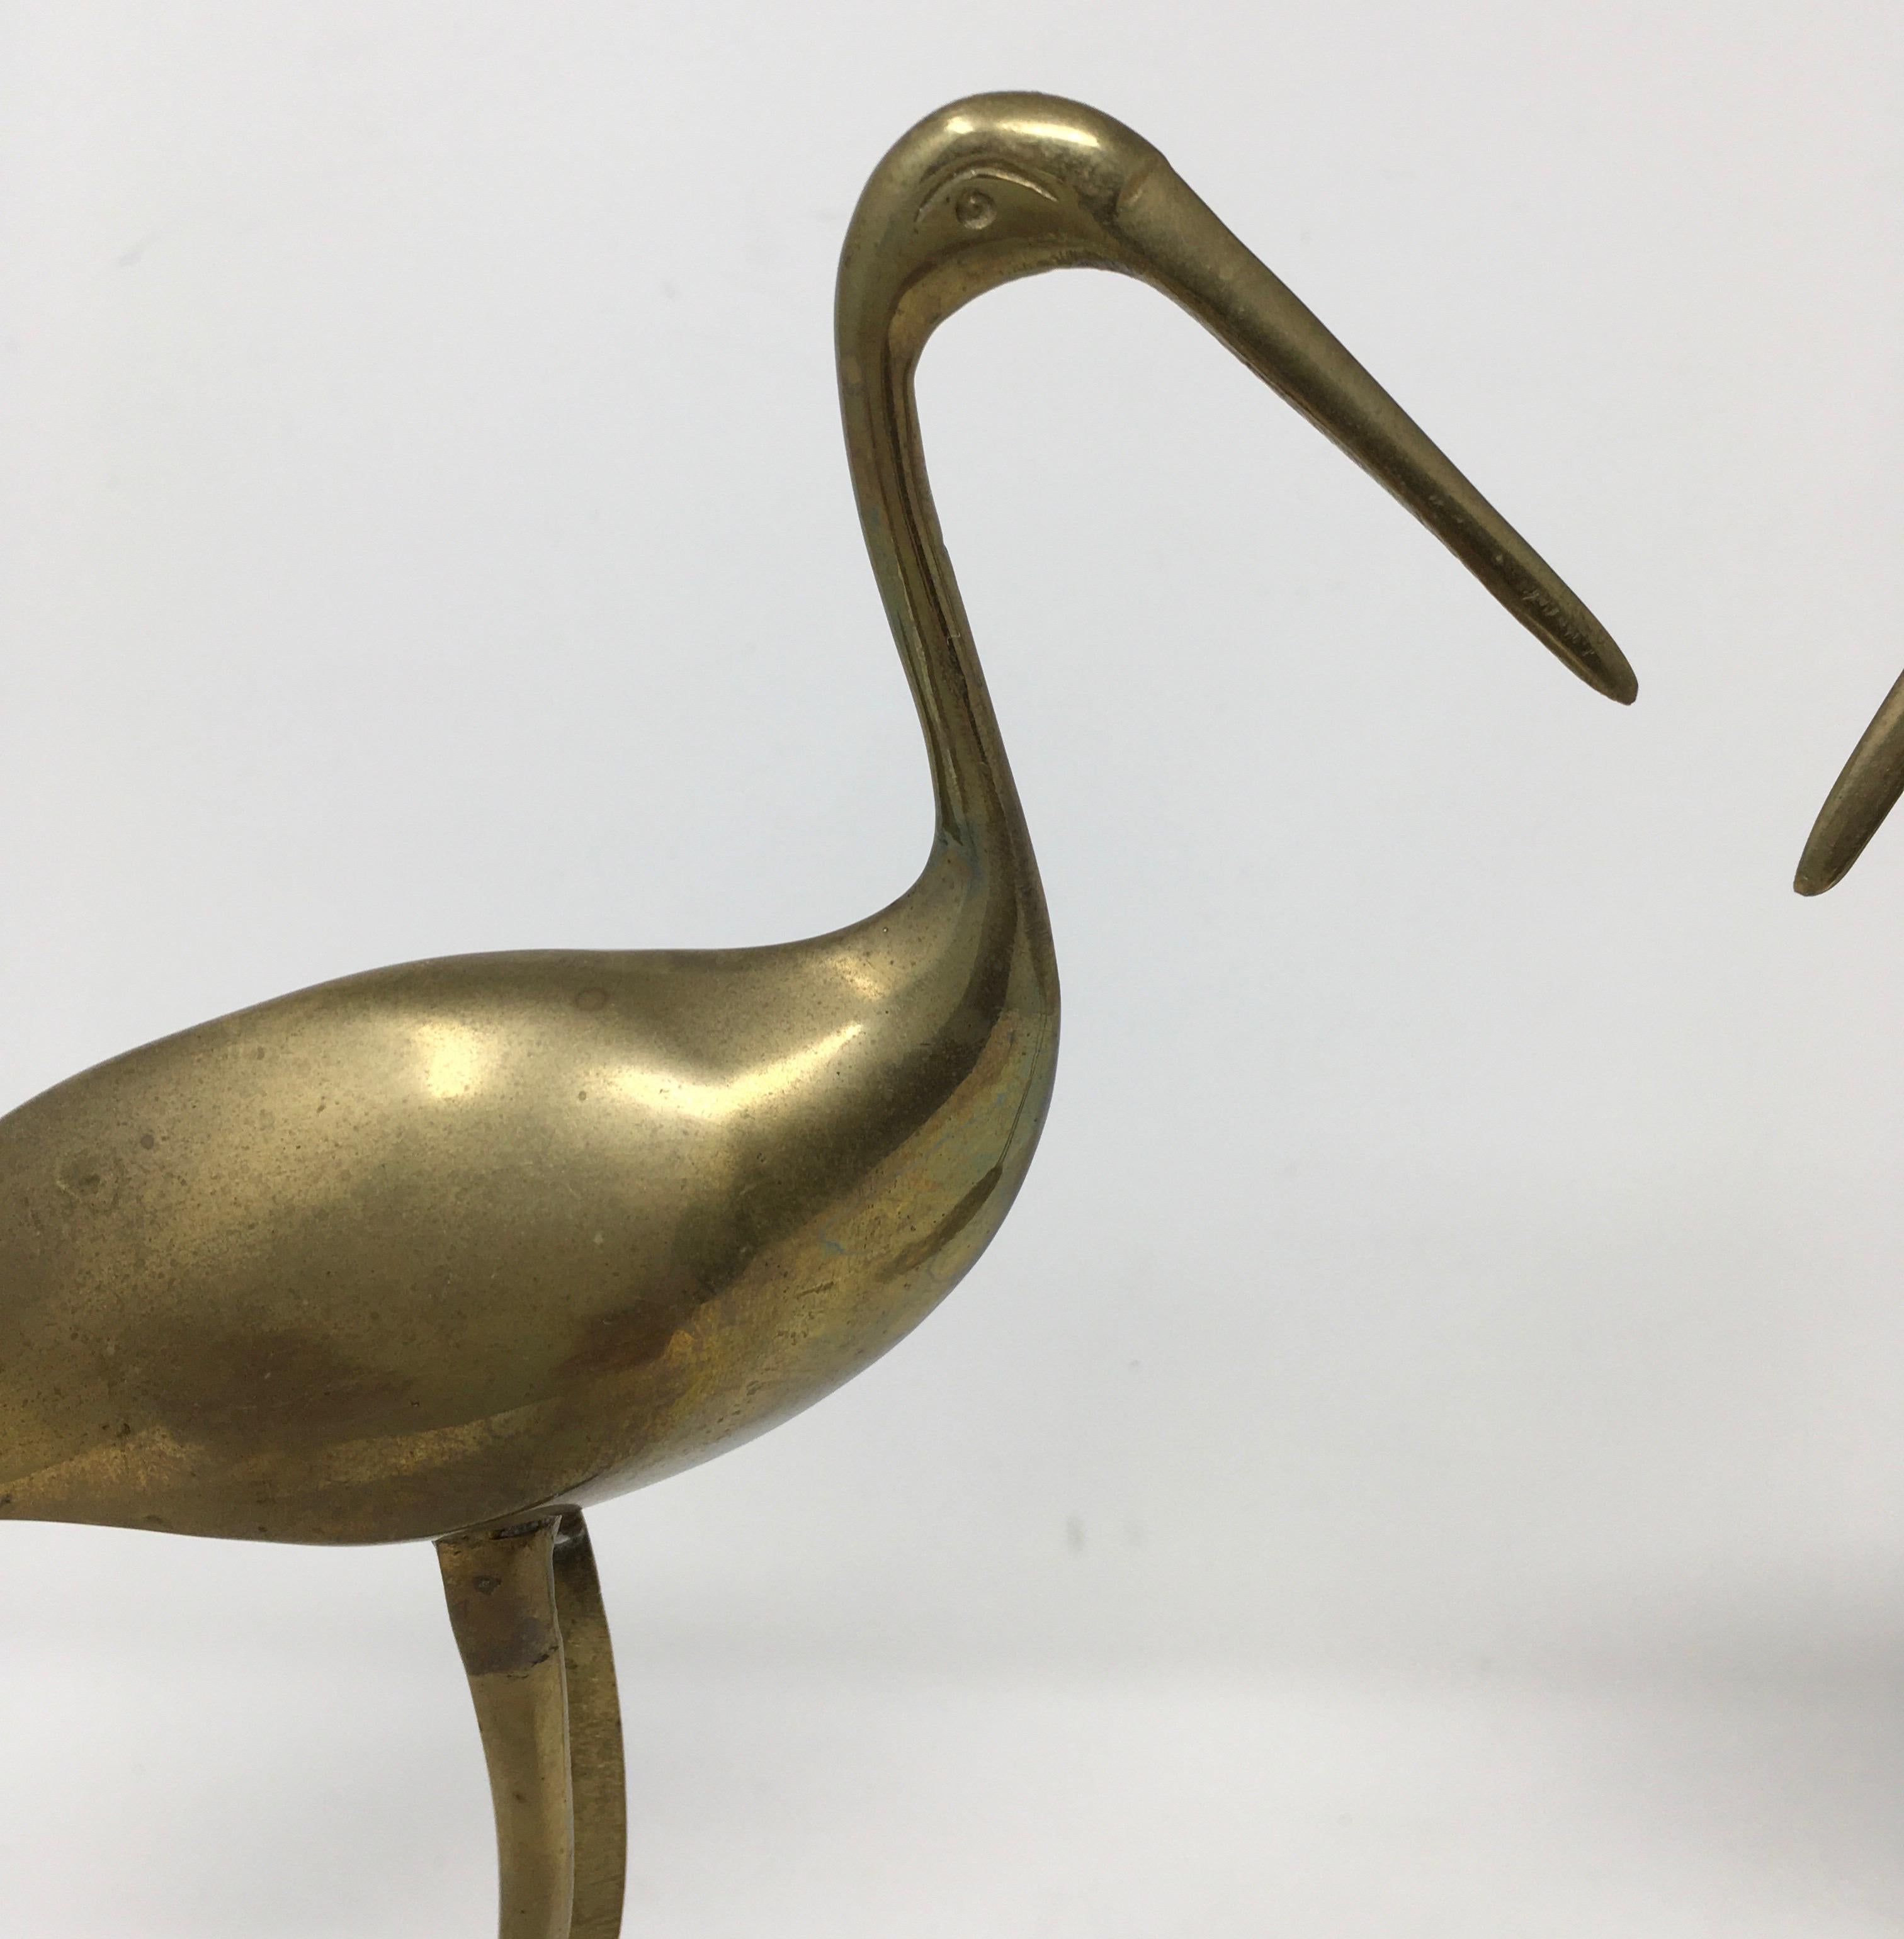 This pair of brass crane birds are very decorative, circa 1970s. Sold as a set. Measures: Larger bird: 10.5